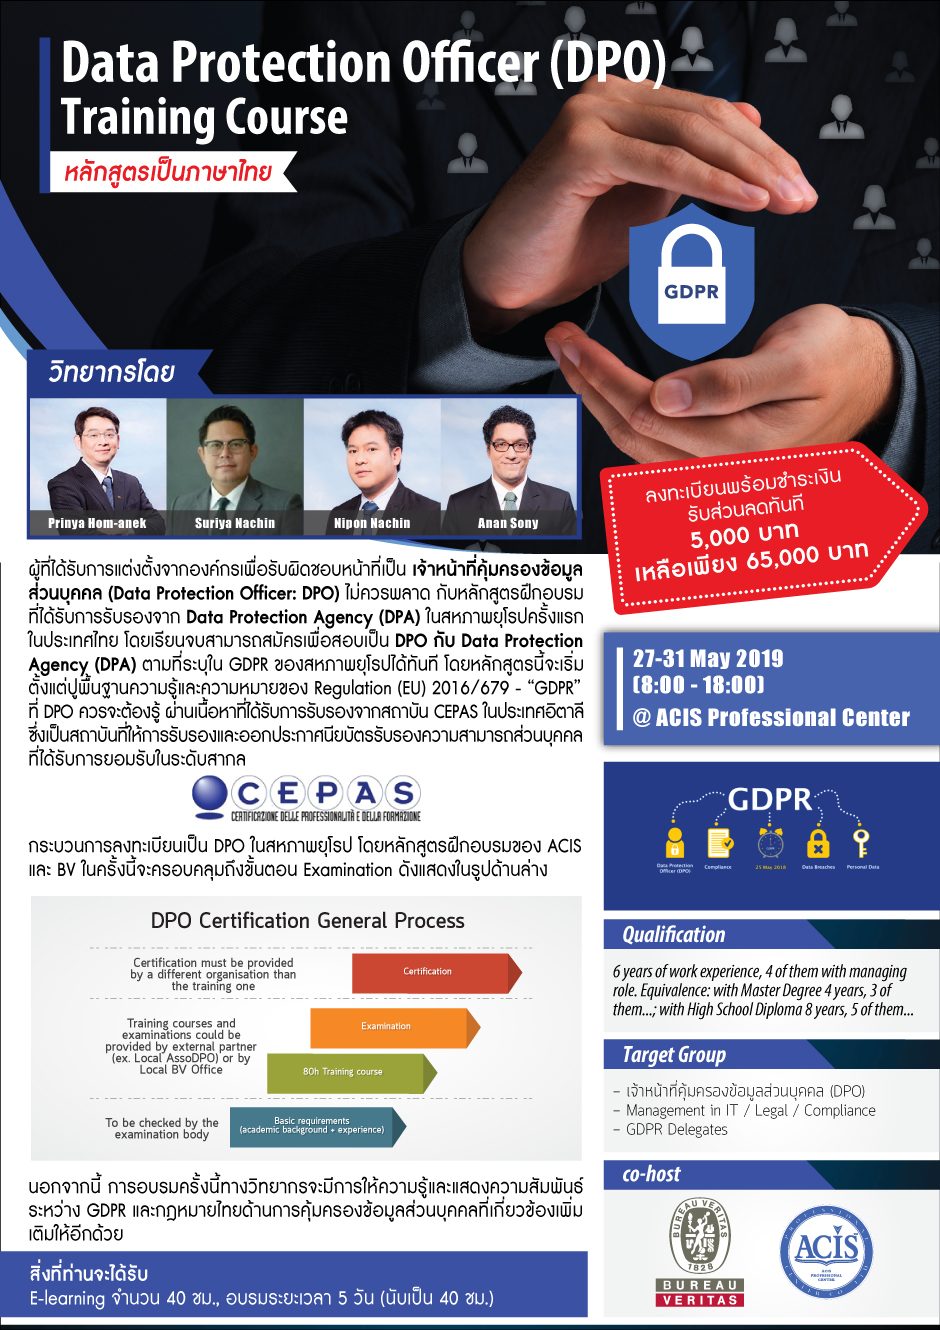 Data Protection Officer (DPO) Training Course